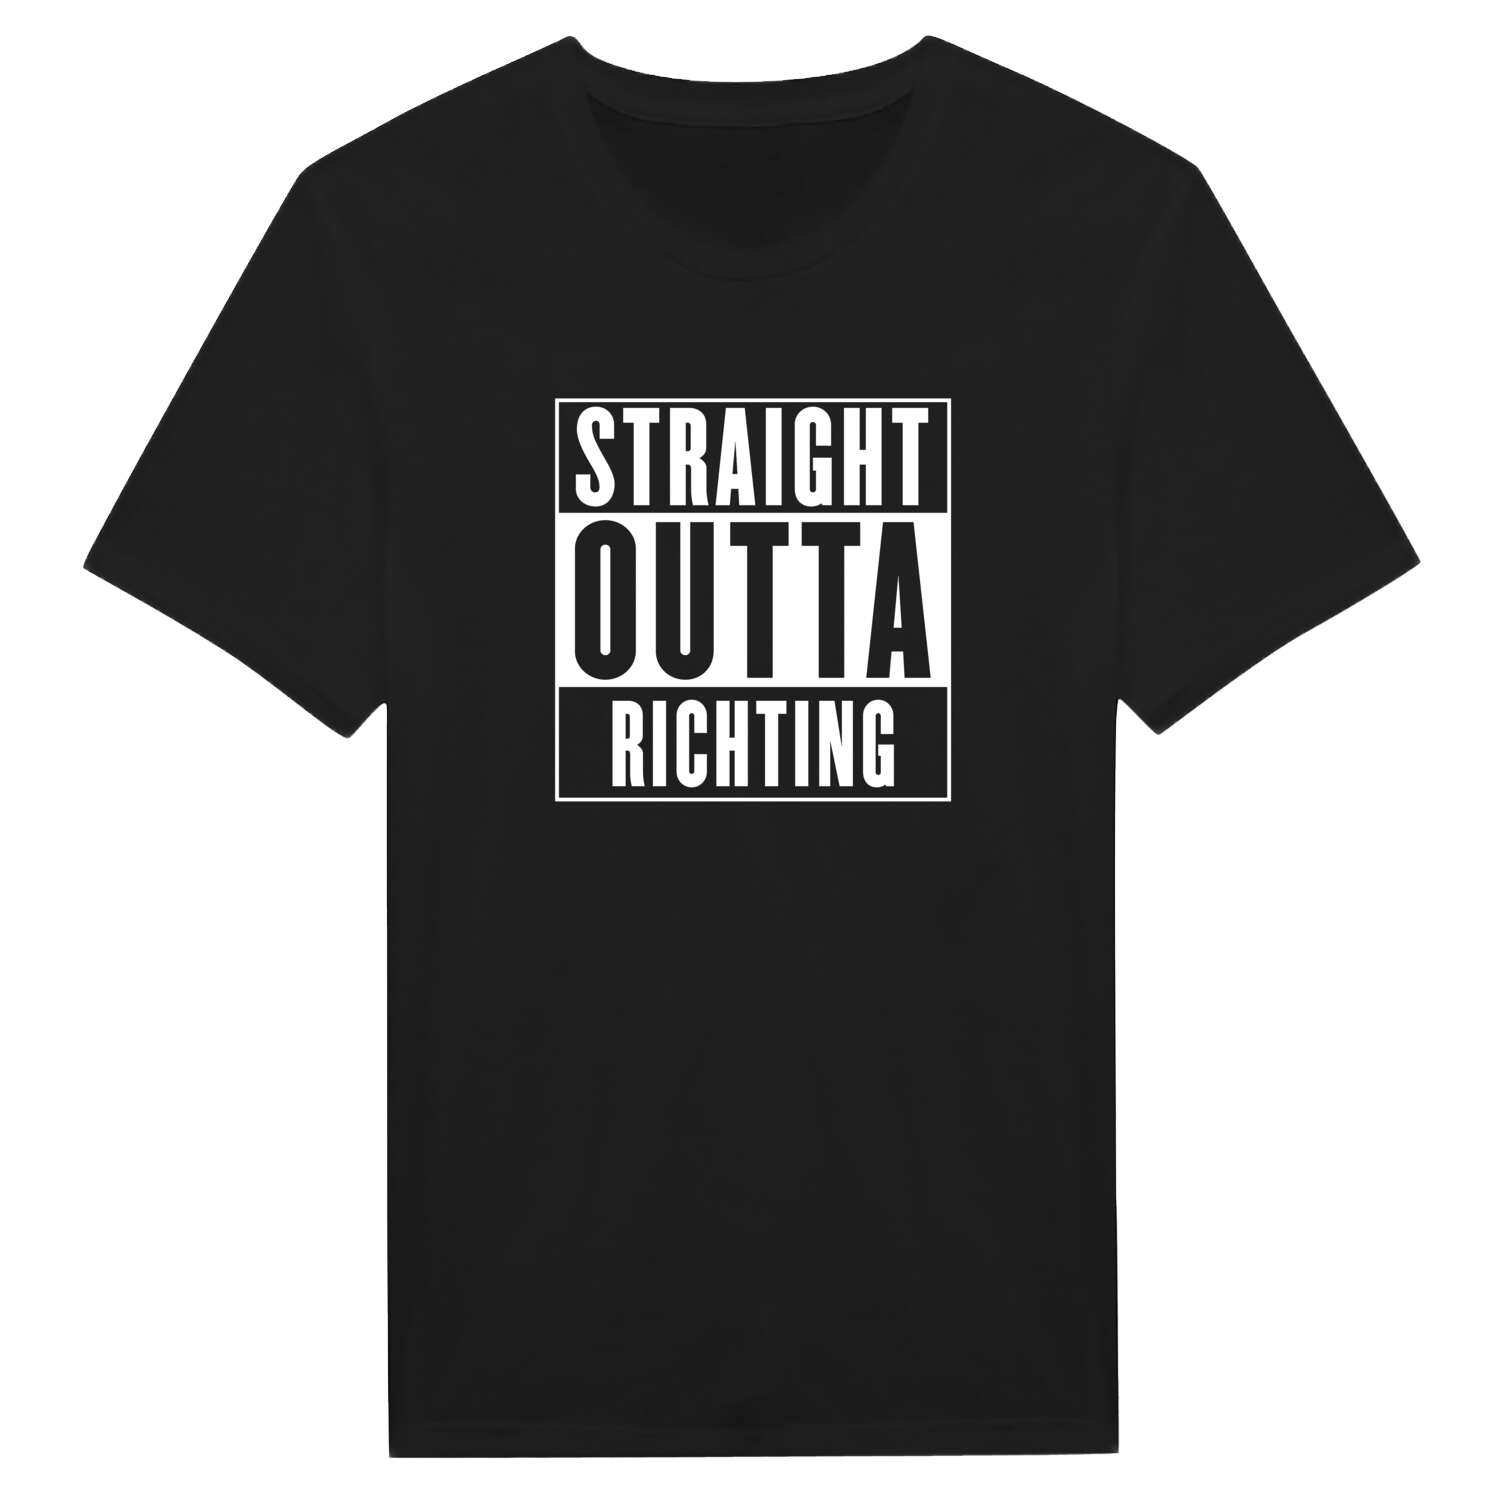 Richting T-Shirt »Straight Outta«